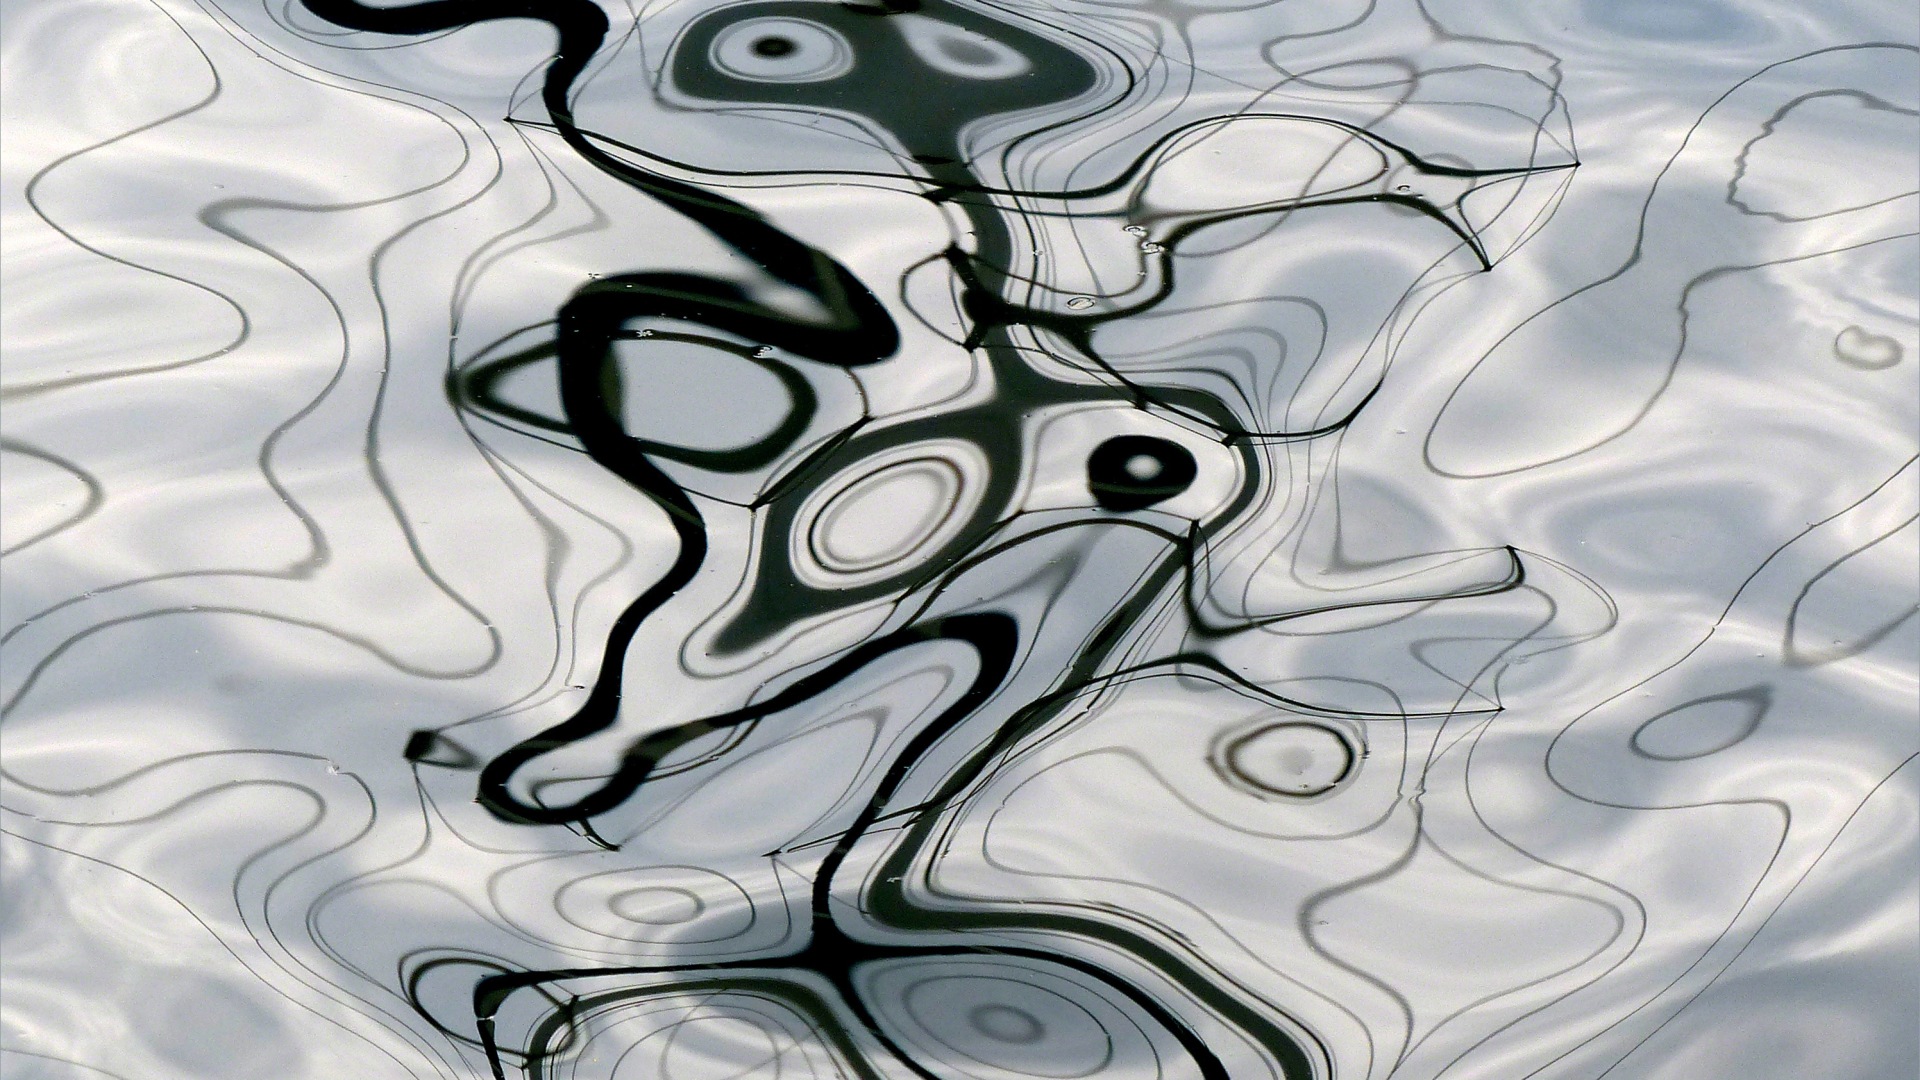 Abstract patterns of reflection on water